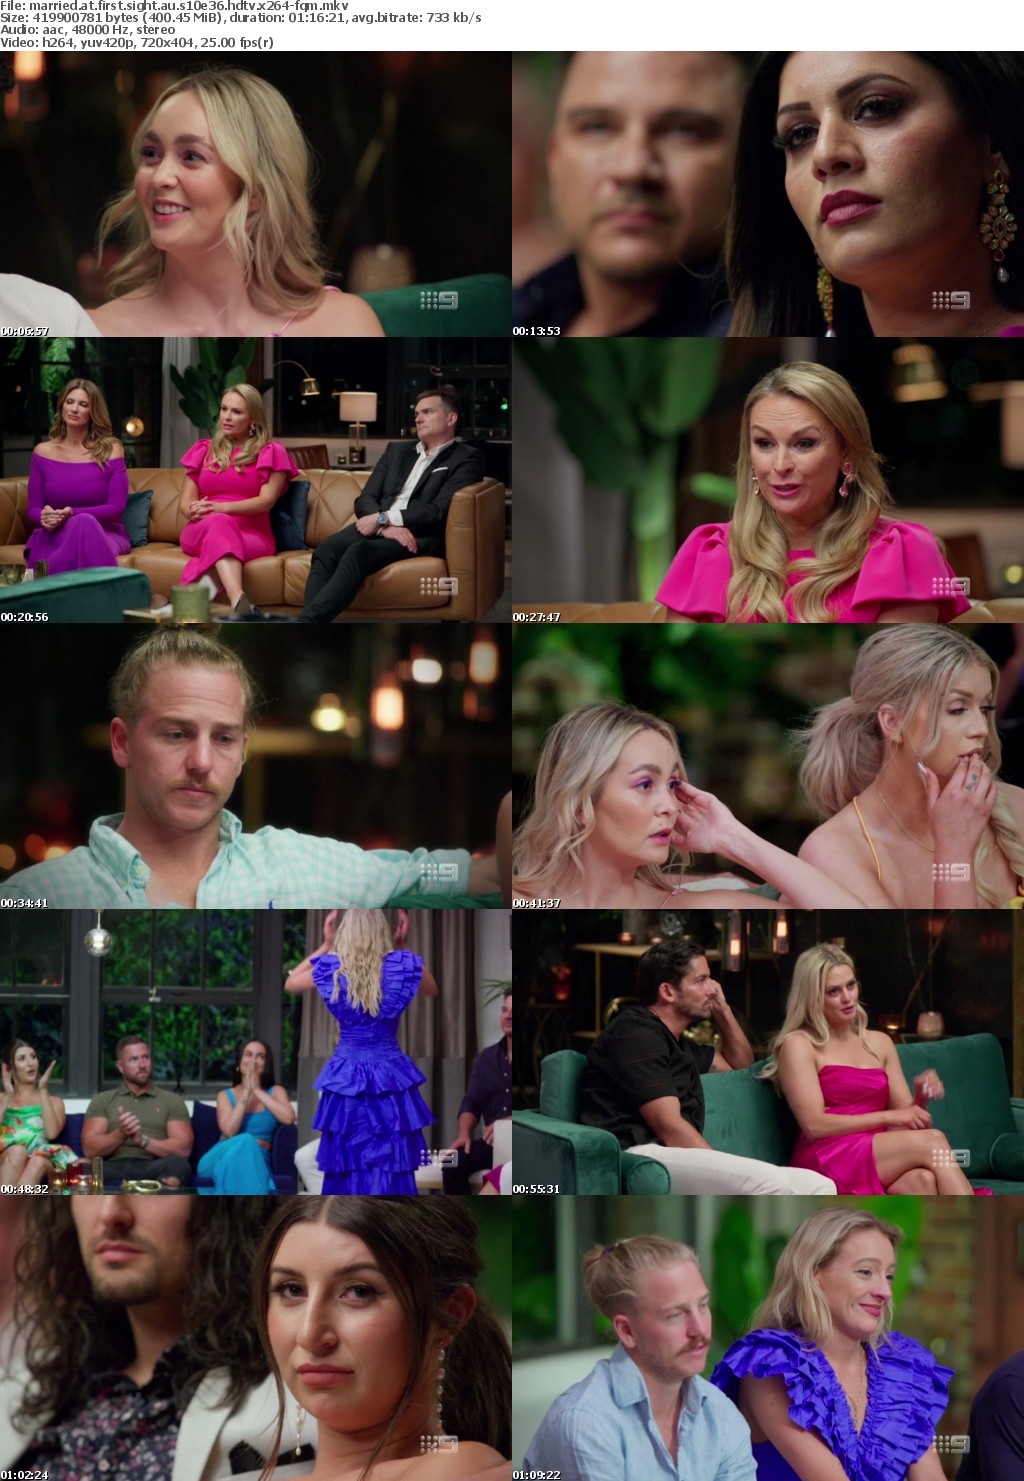 Married At First Sight AU S10E36 HDTV x264-FQM